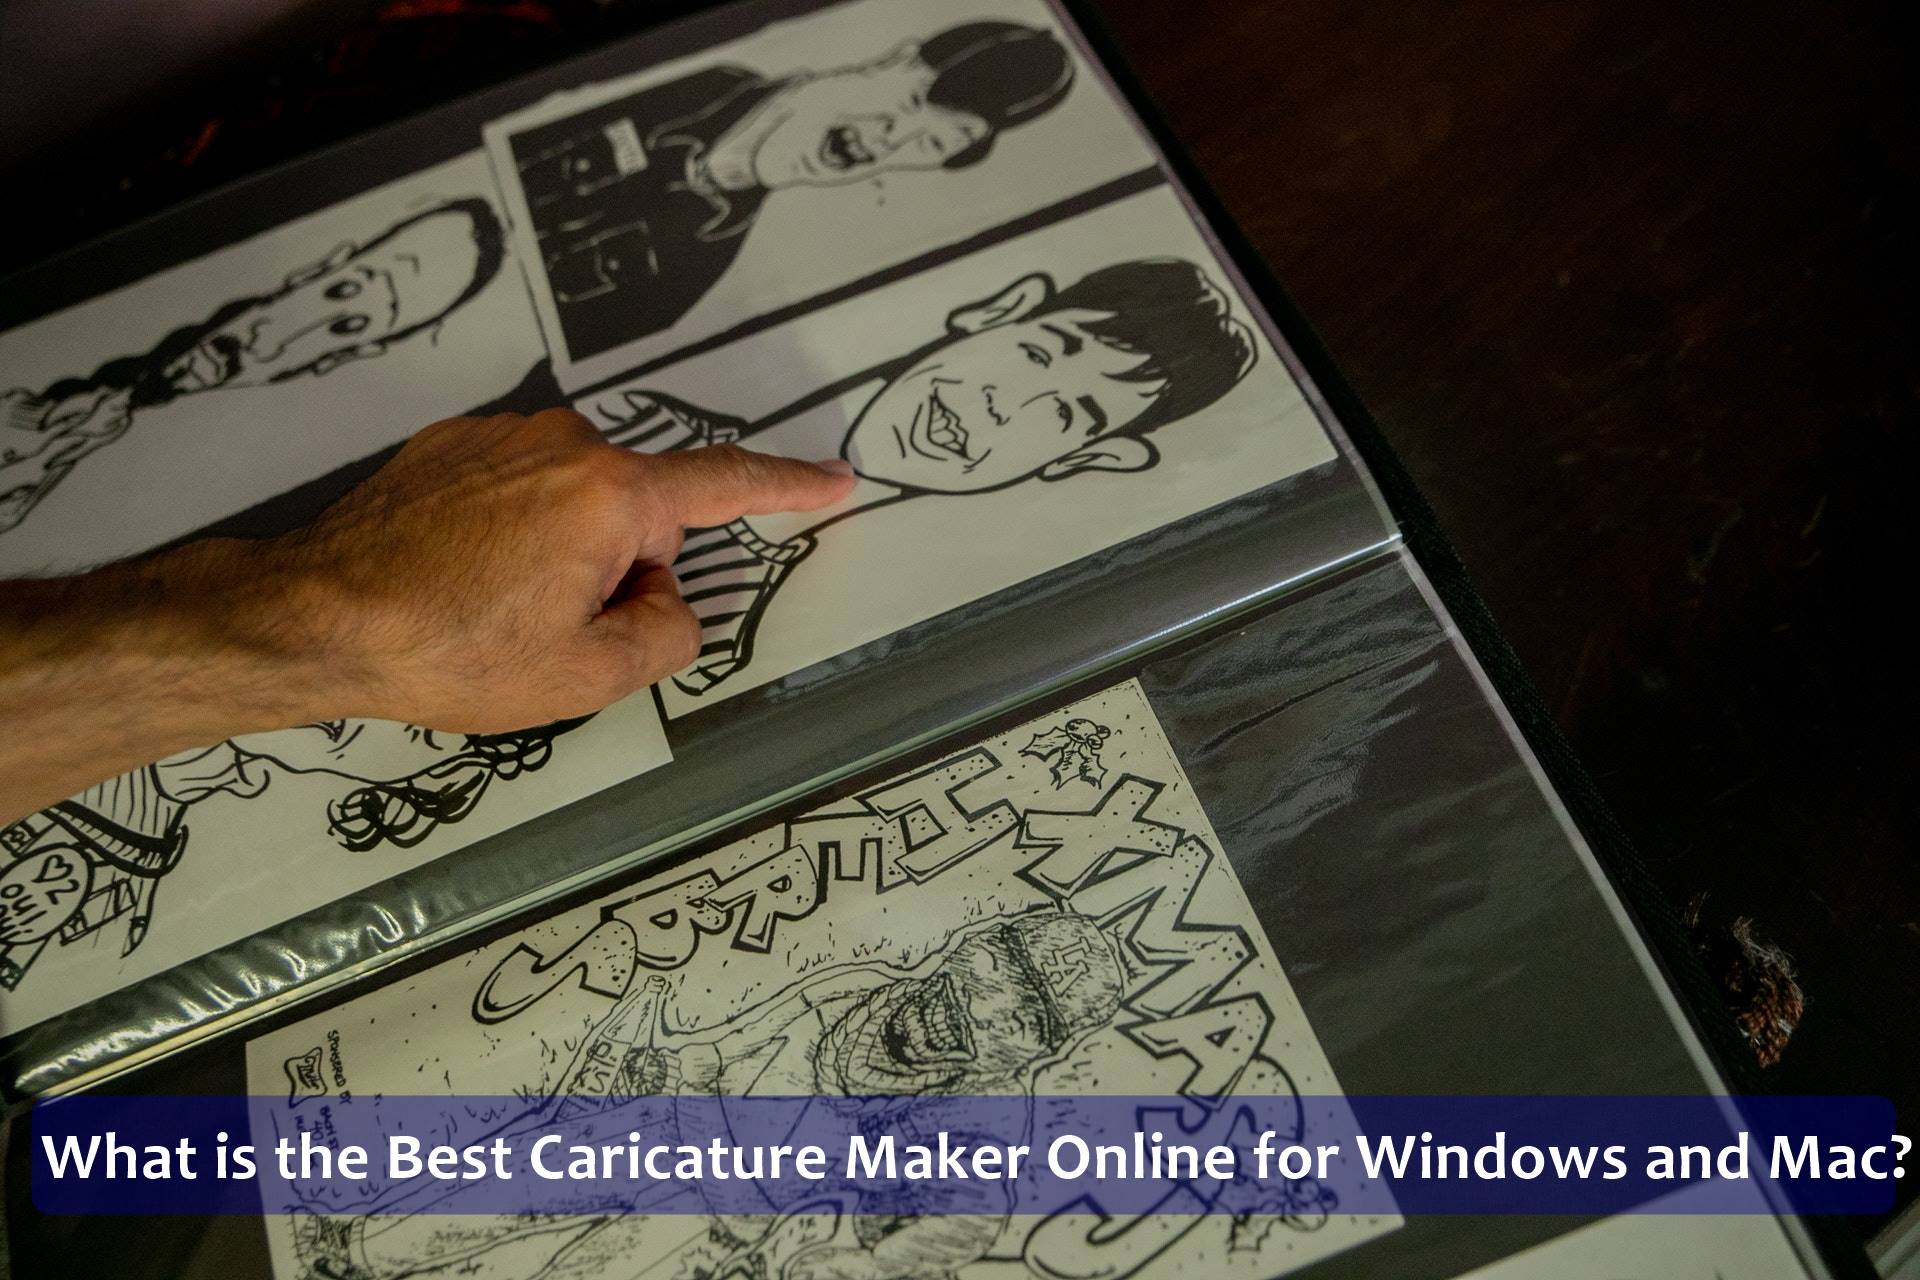 What is the Best Caricature Maker Online for Windows and Mac?